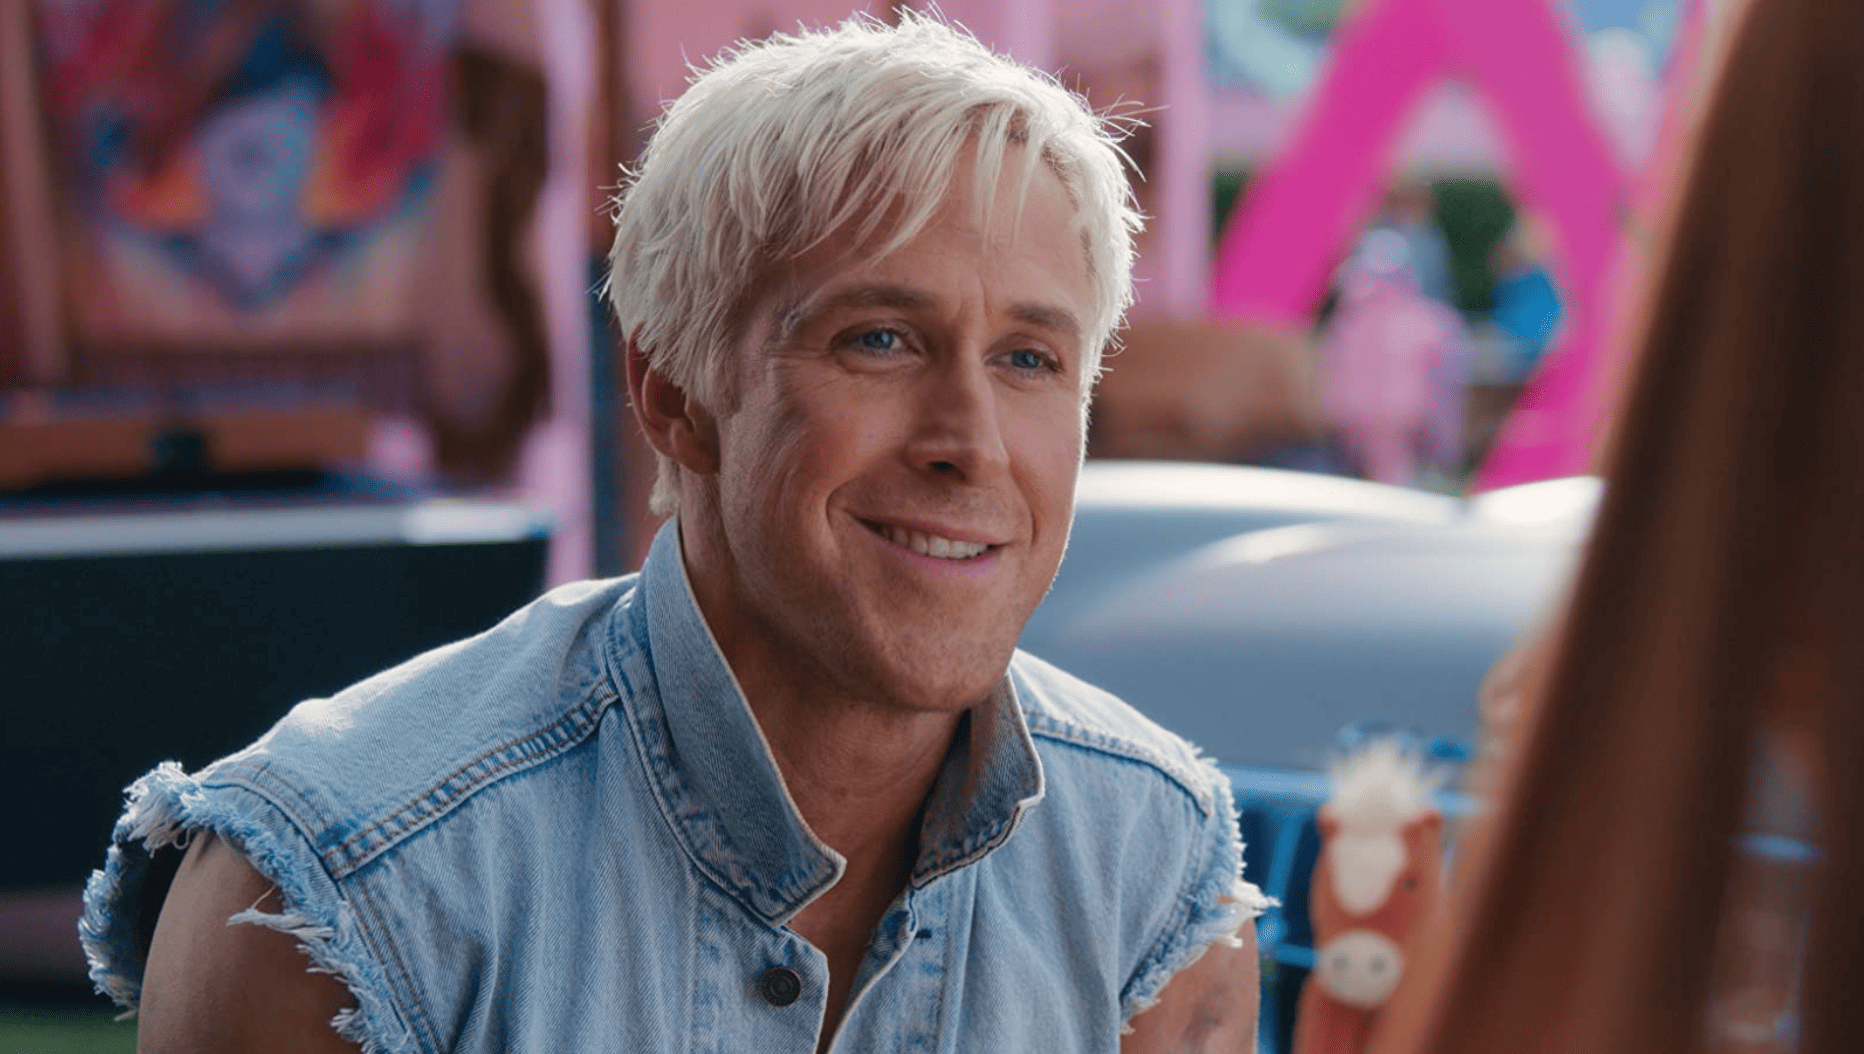 A close-up of Ryan Gosling as Ken with his hair bleached and some squint lines showing in this image from Warner Bros